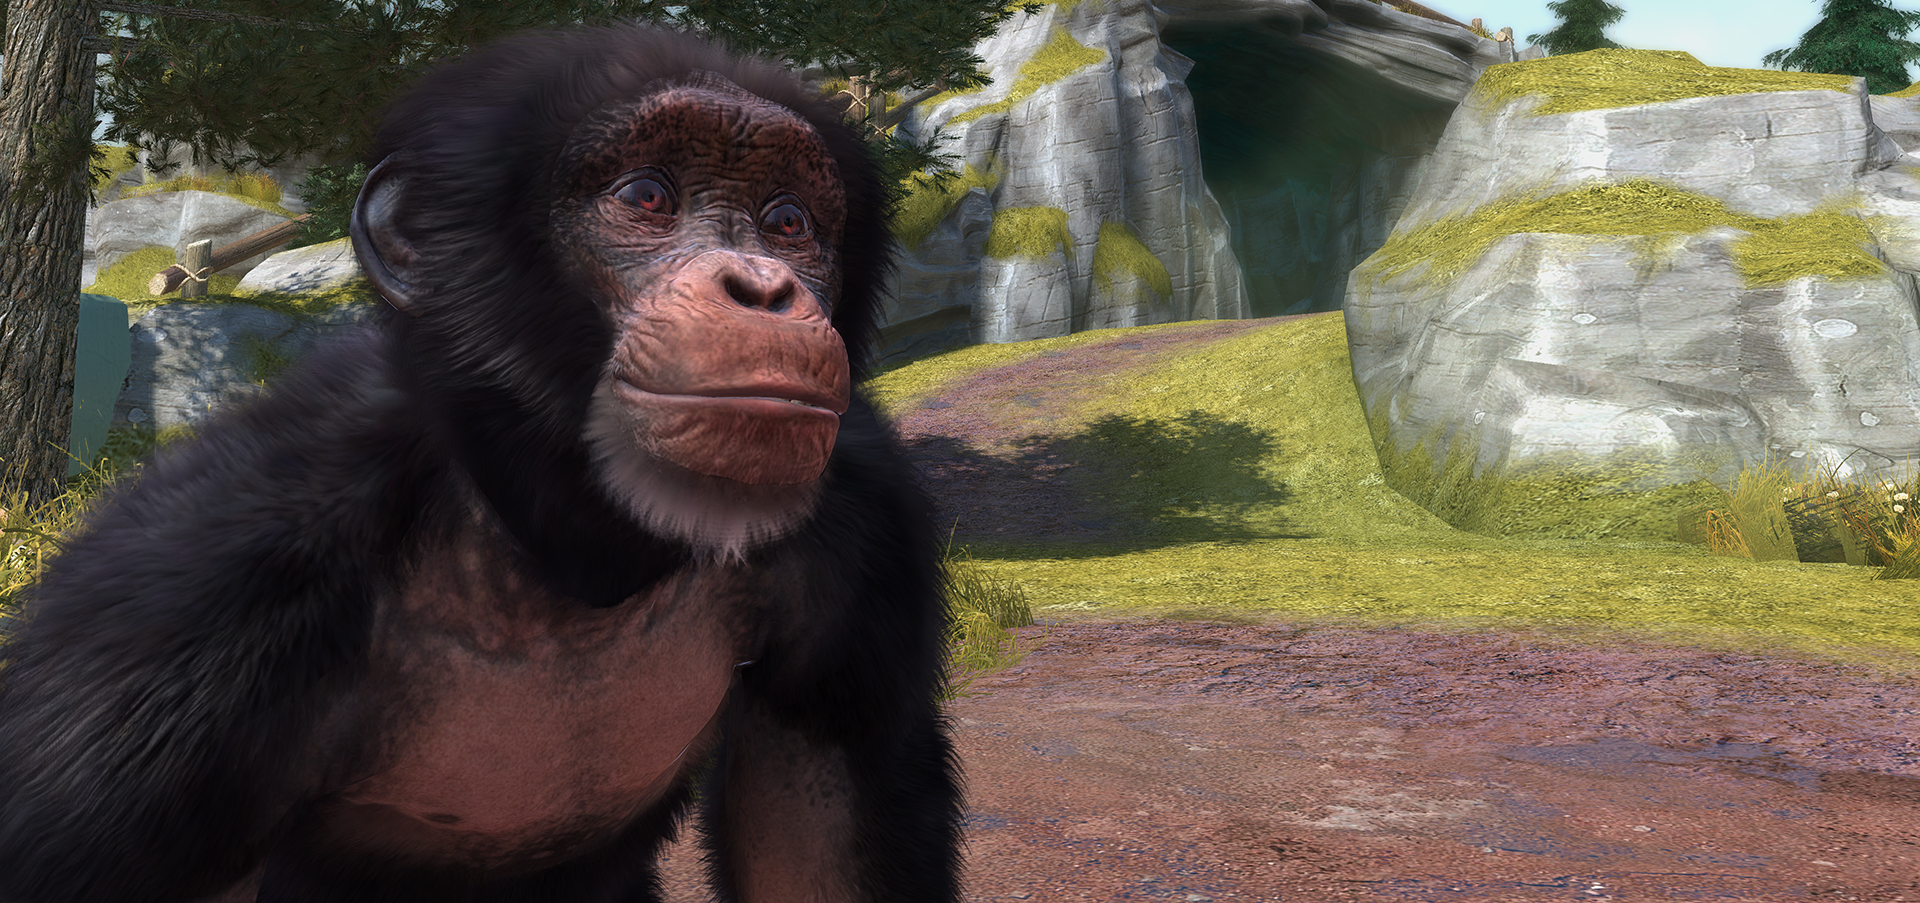 Zoo Tycoon: An Unlikely Treat from Xbox One's Launch Lineup | VG247